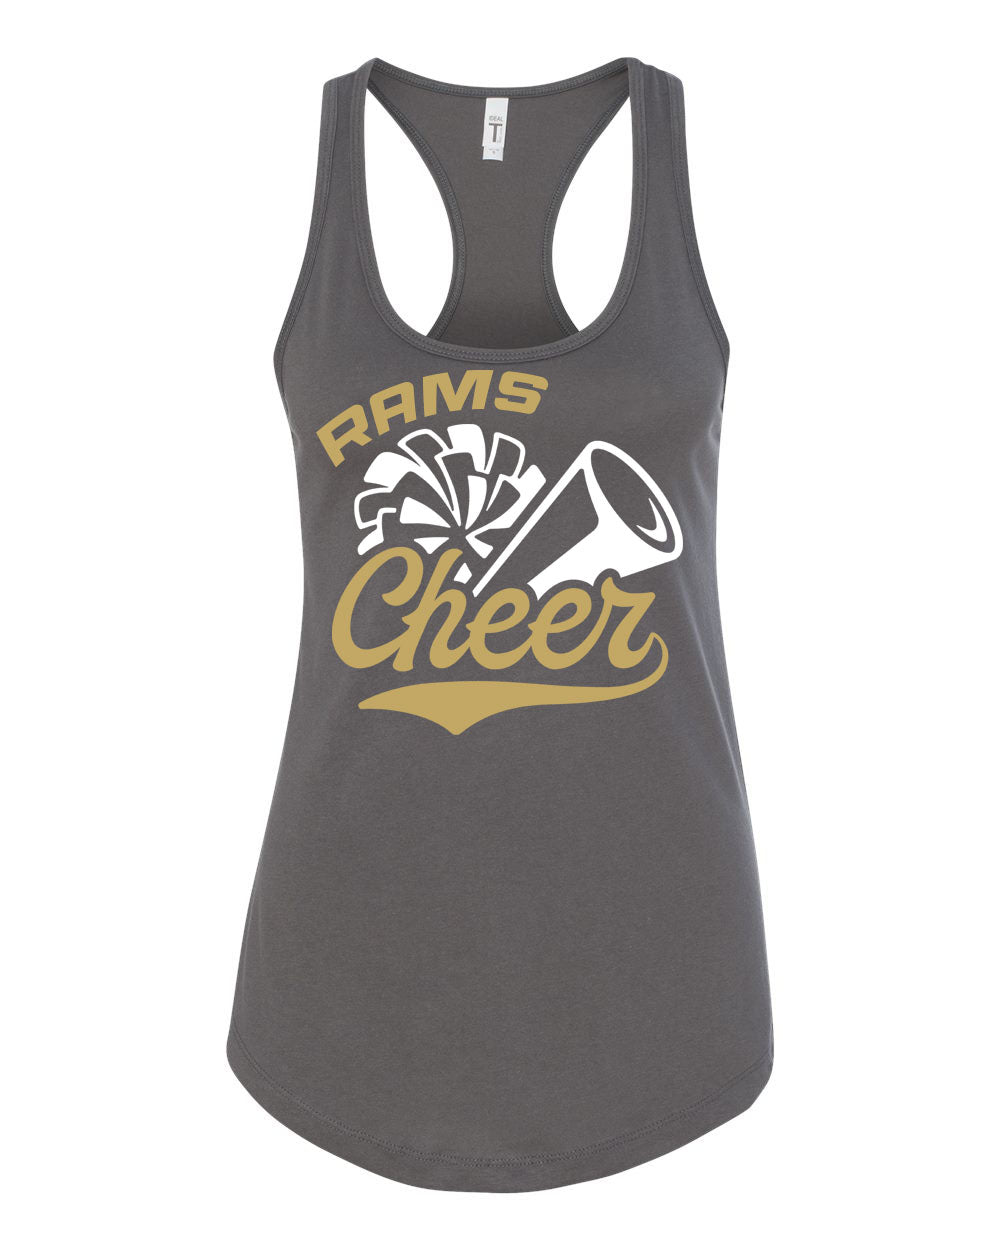 Sussex Middle Cheer Design 1 Tank Top